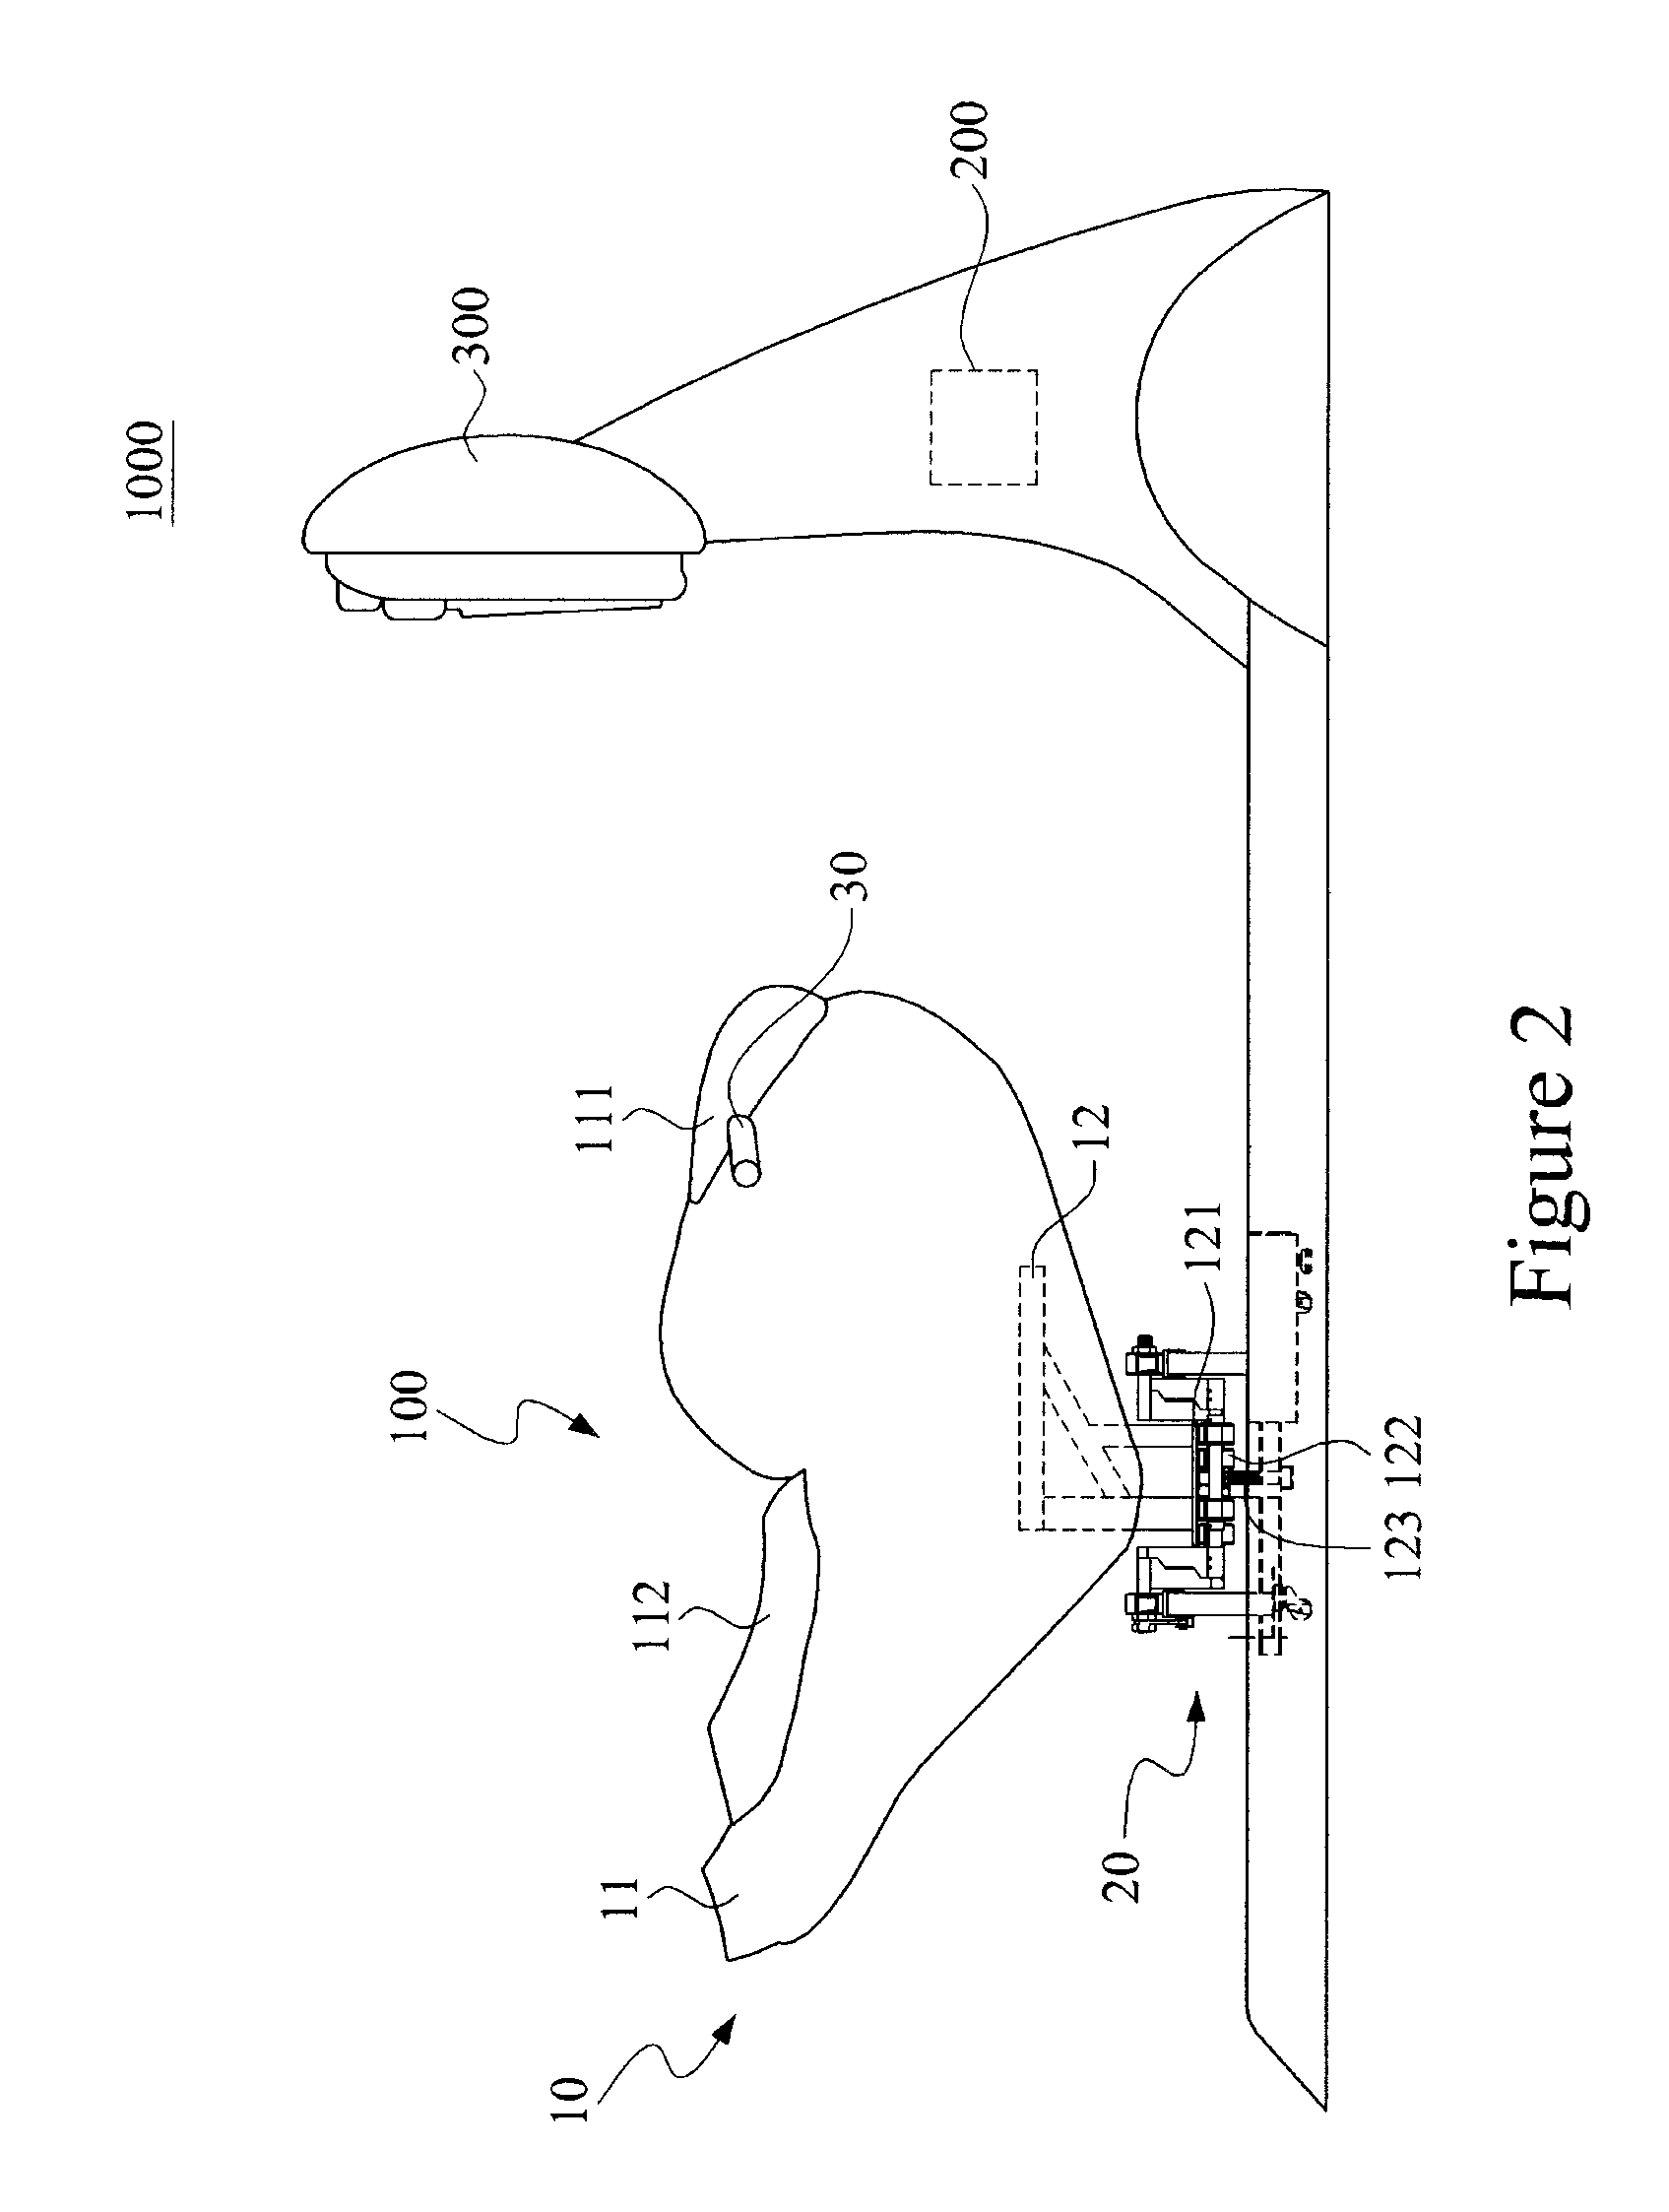 Driving simulation device for executing a simulating game